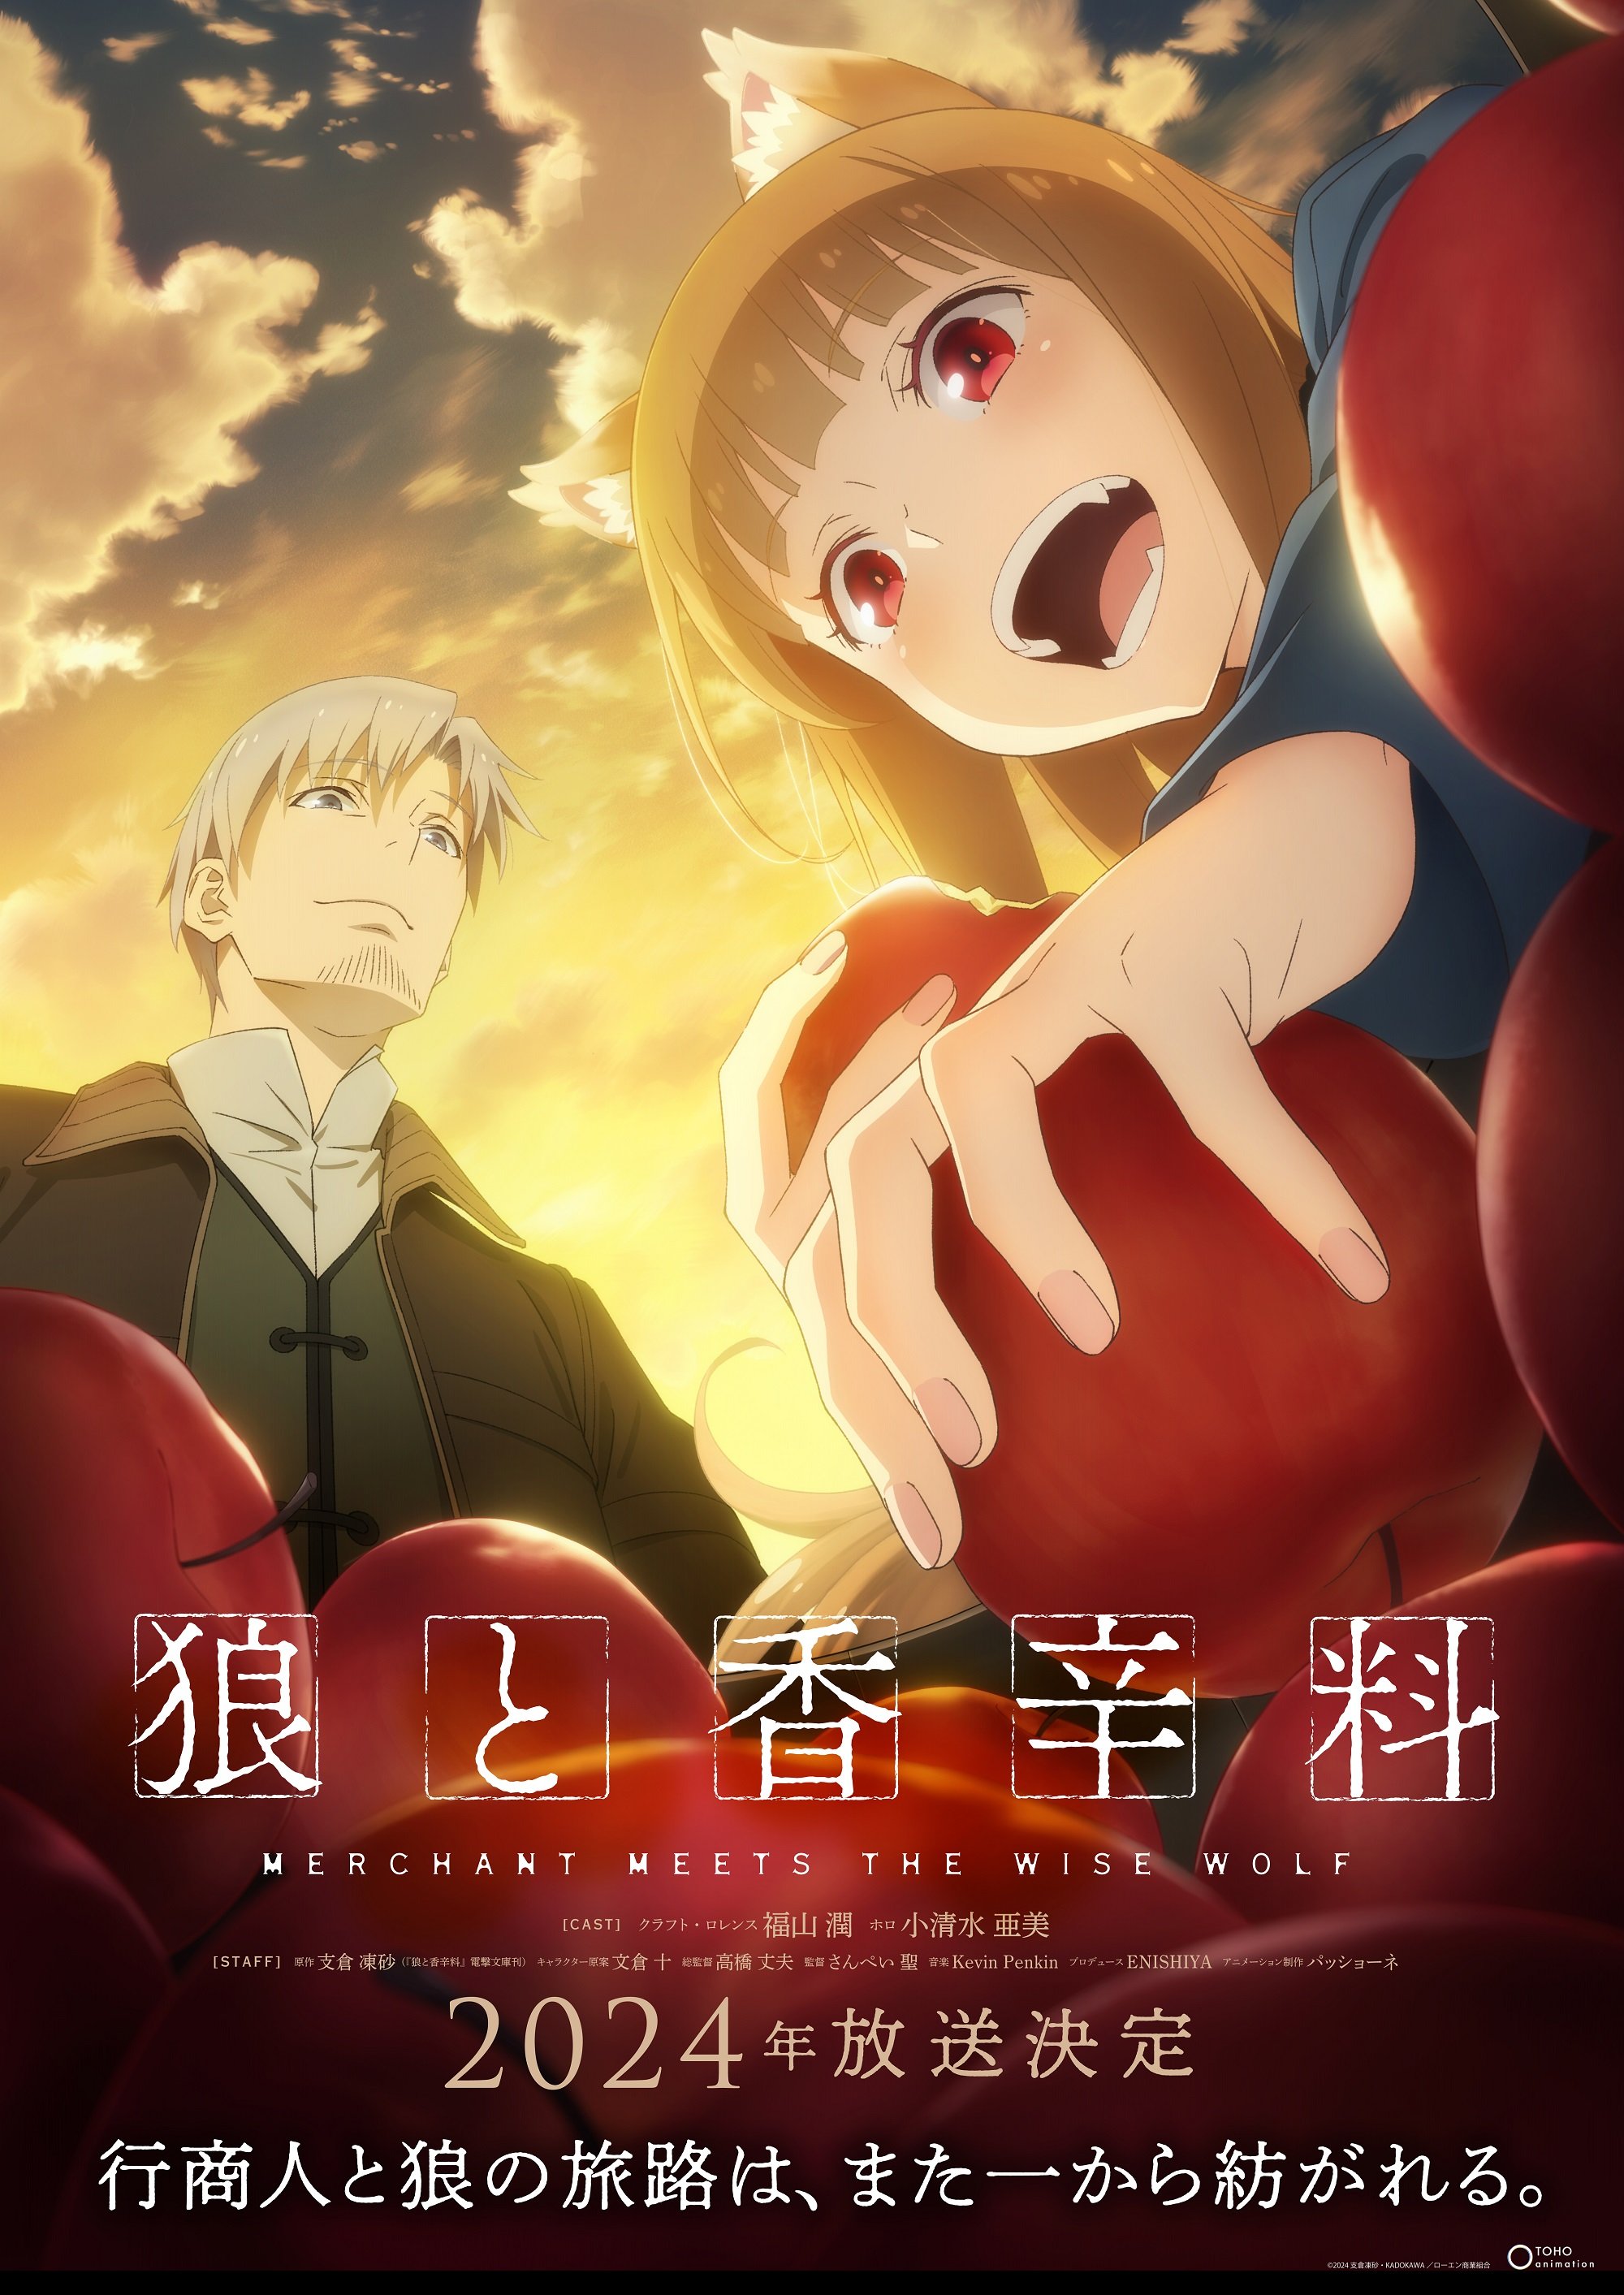 Spice and Wolf New Anime Project to Broadcast in 2024